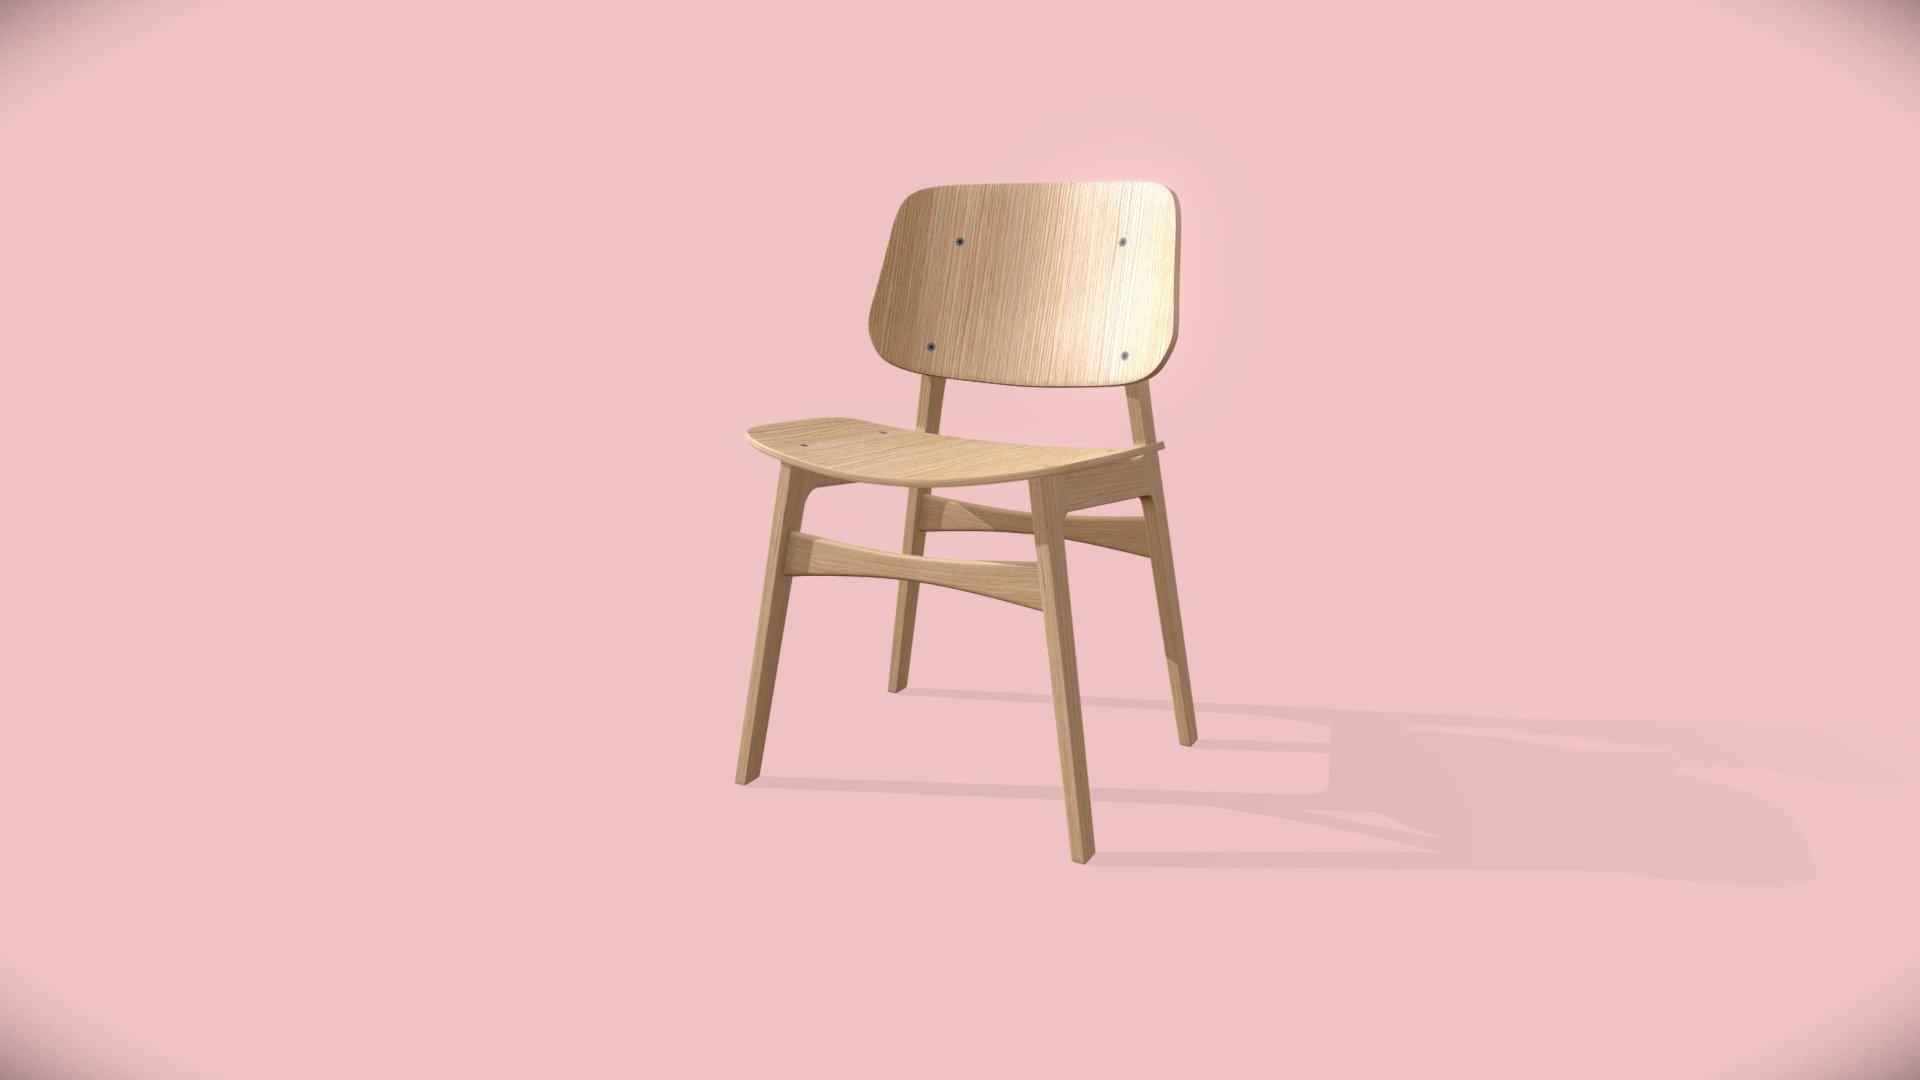 High-poly Modern Wood Chair.

I made this chair using video guides by Andrew Price. It's not something unique, but you can use it in your scenes since it's a well-modeled chair 3d model